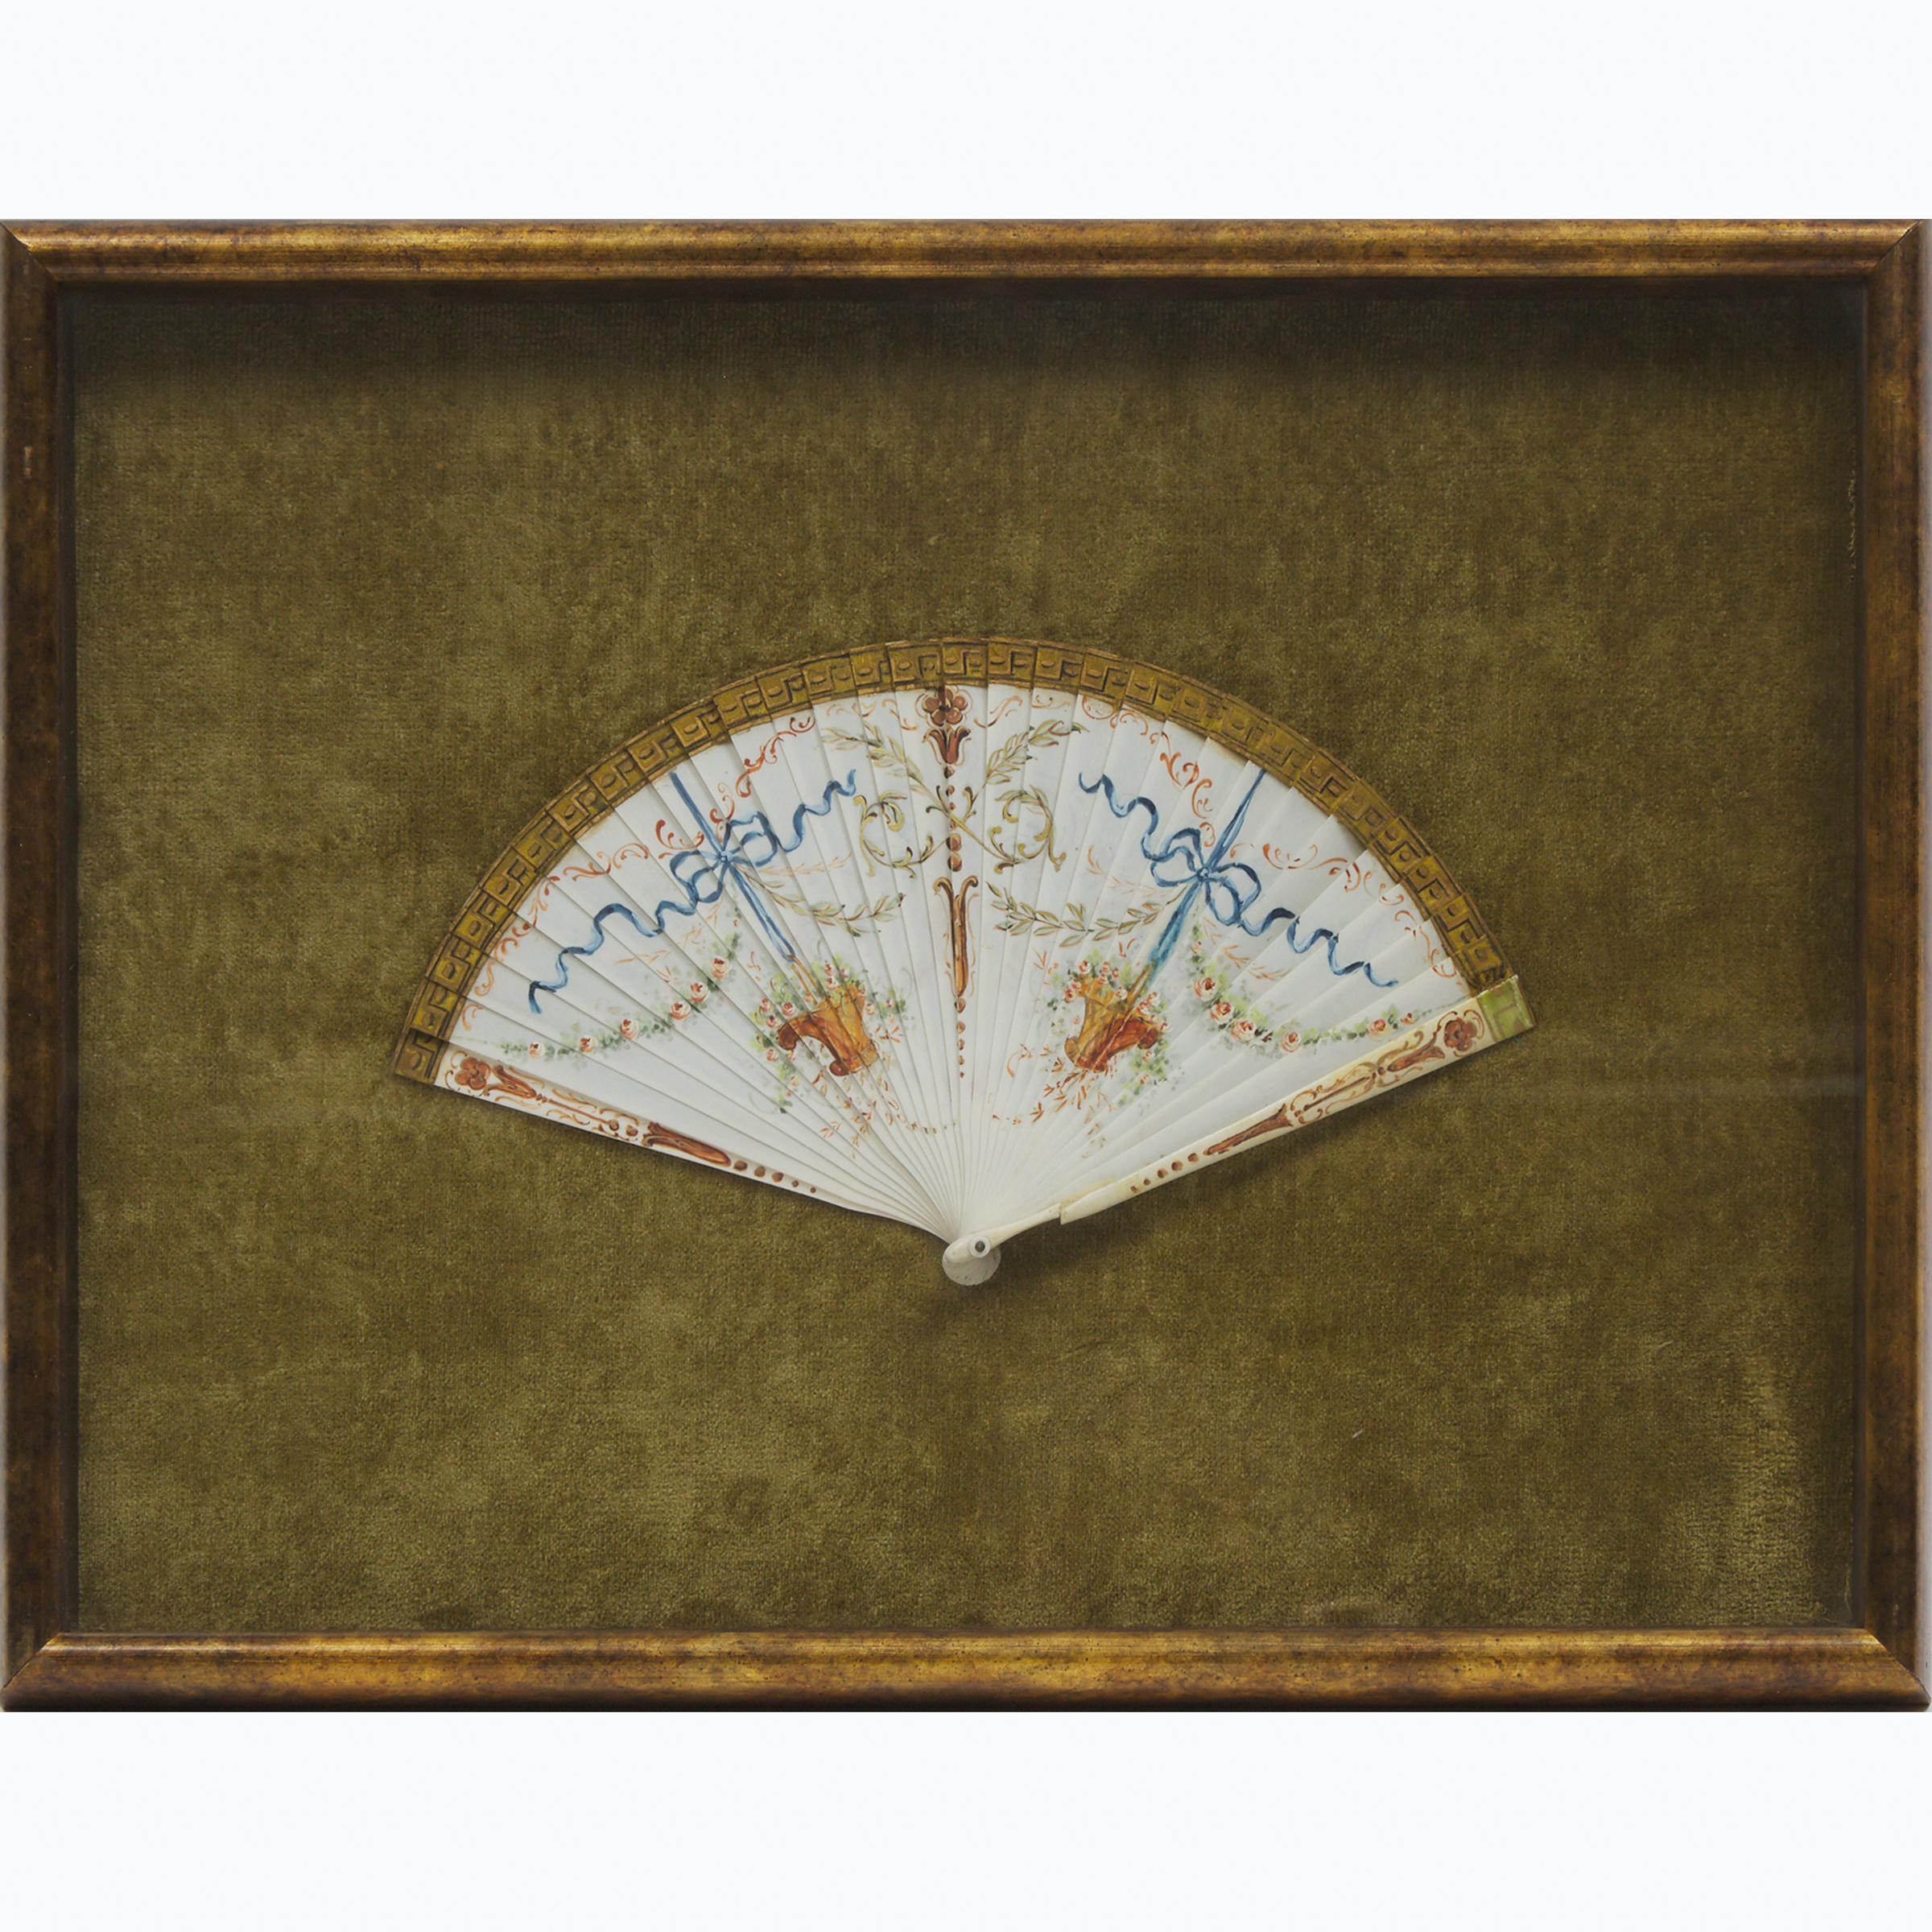 Frame Cased Petite French Painted Bone Fan, 19th century